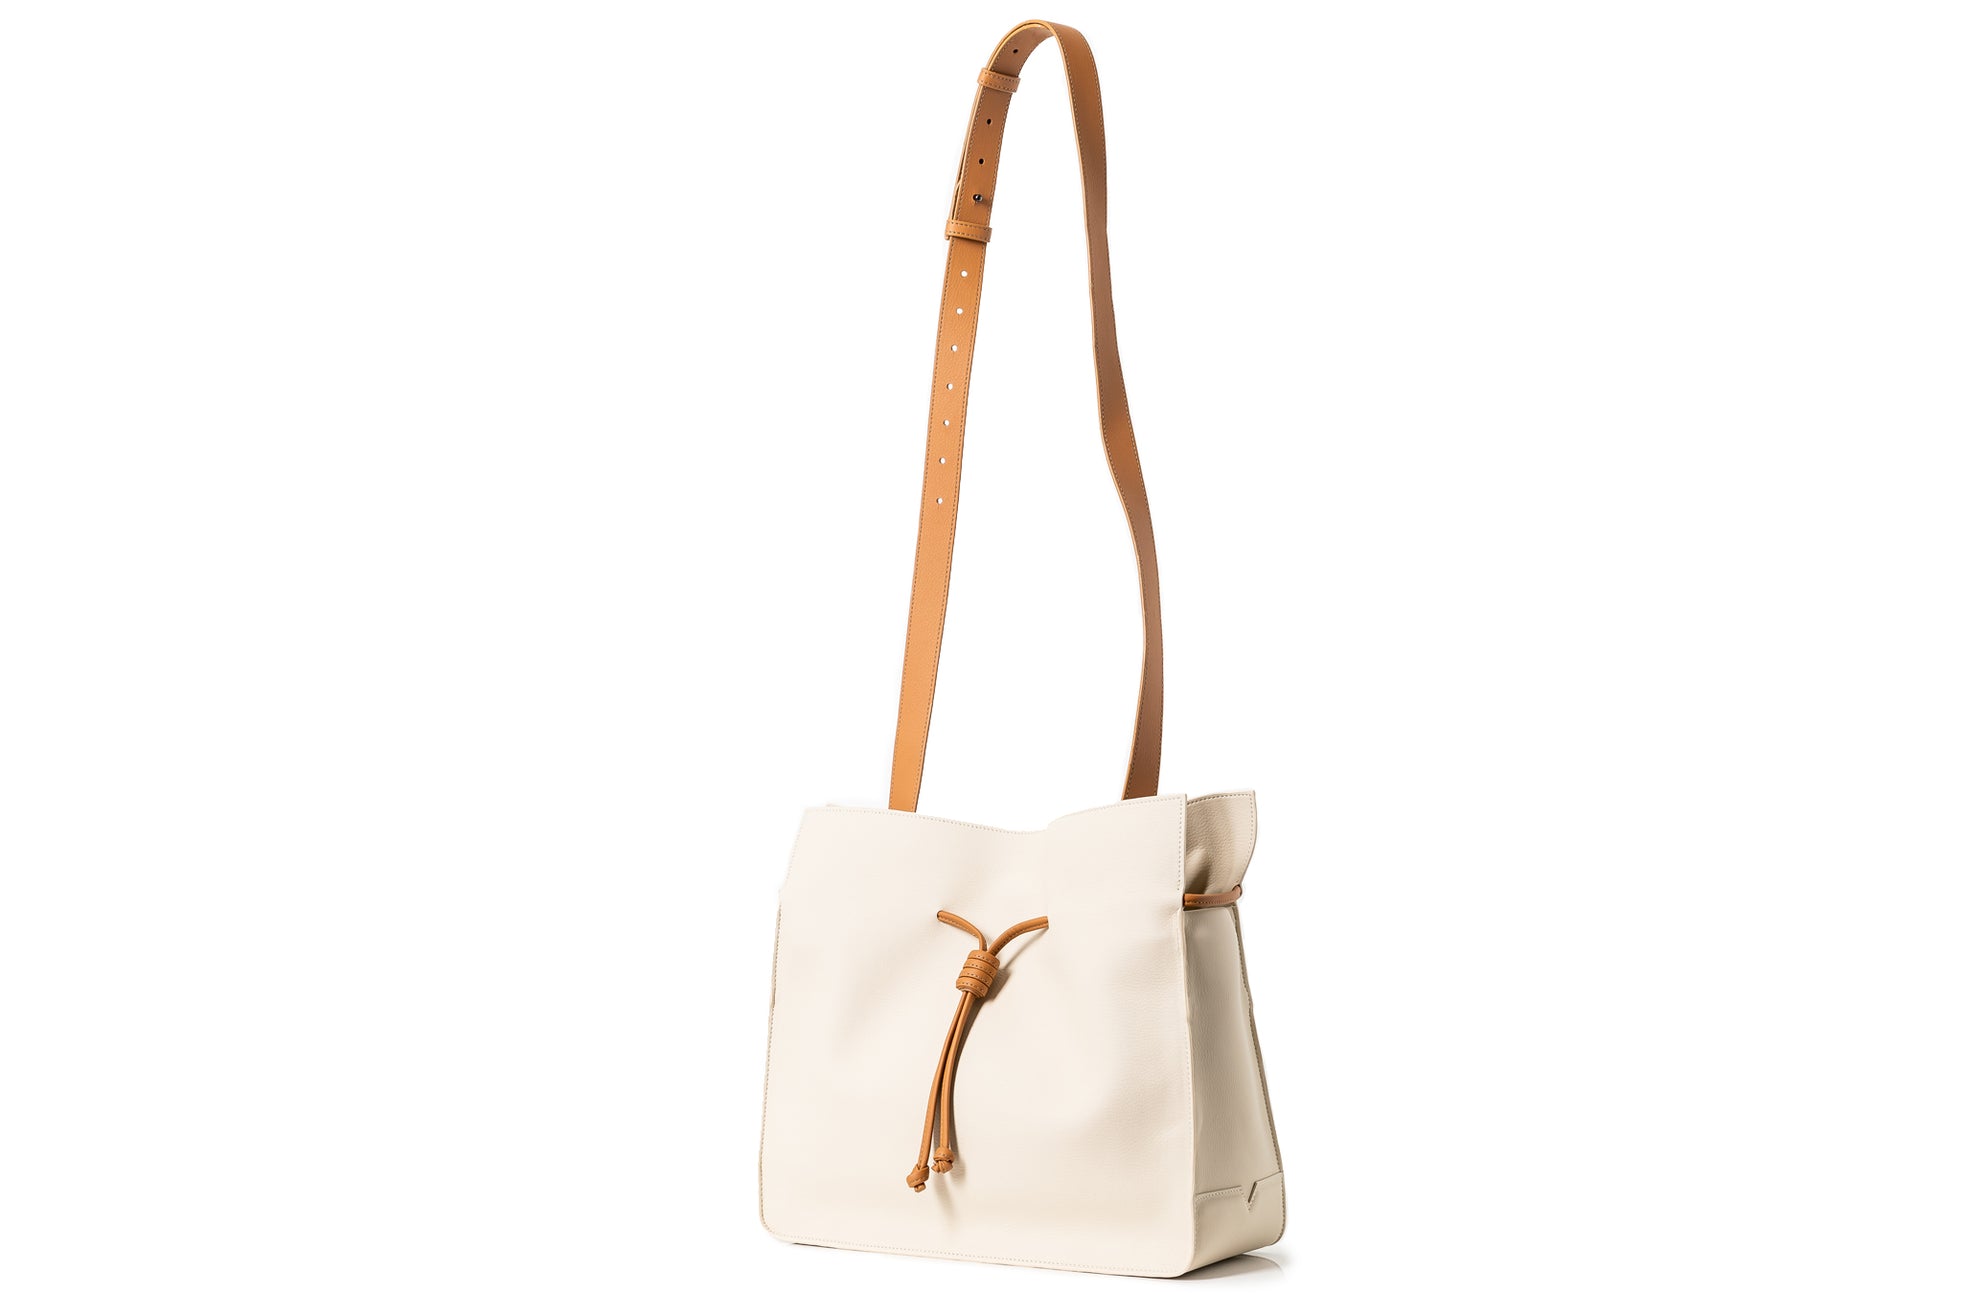 The Medium Shopper in Technik-Leather in Oat and Caramel image 12